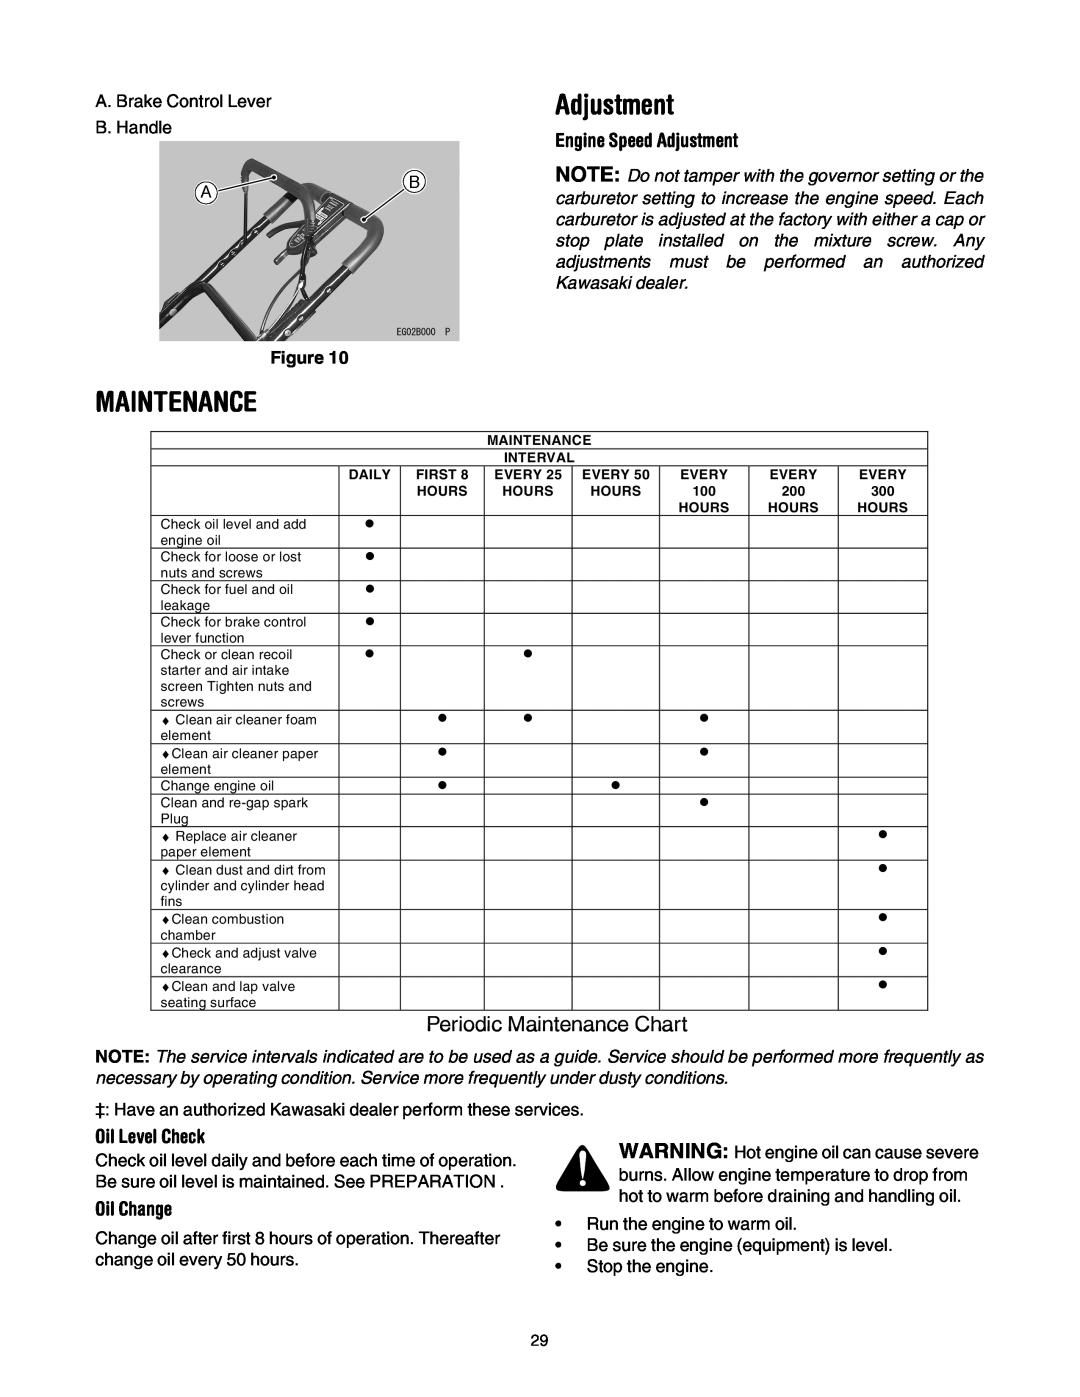 Cub Cadet E977C, 977A manual Periodic Maintenance Chart, Engine Speed Adjustment, Oil Level Check, Oil Change 